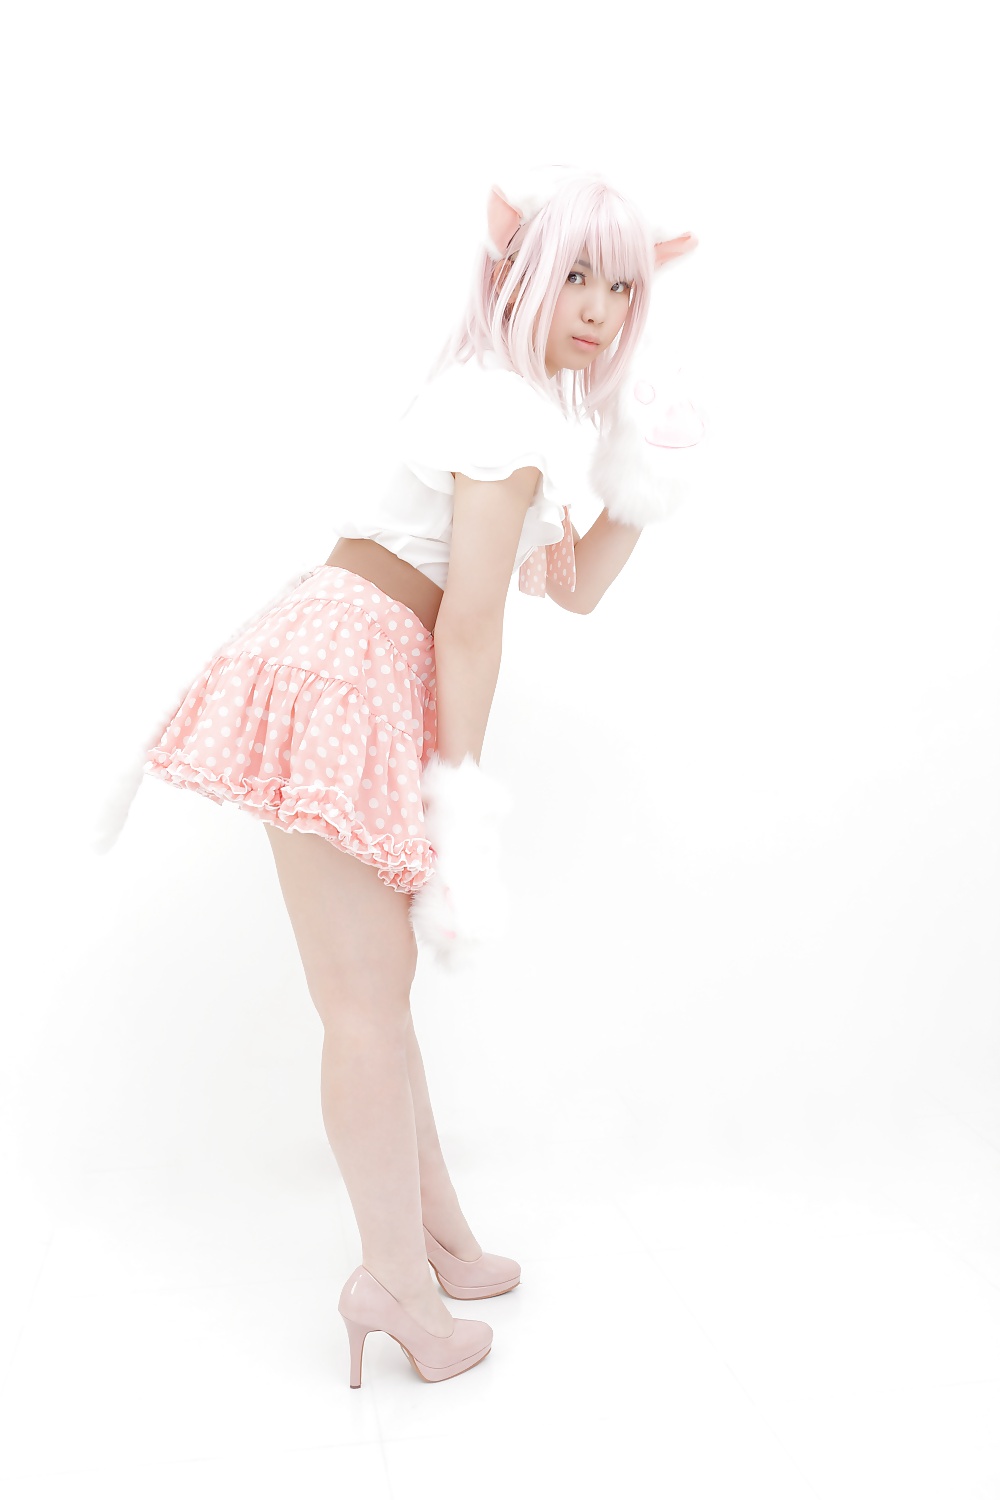 Asiatica cosplay in bianco
 #26558581